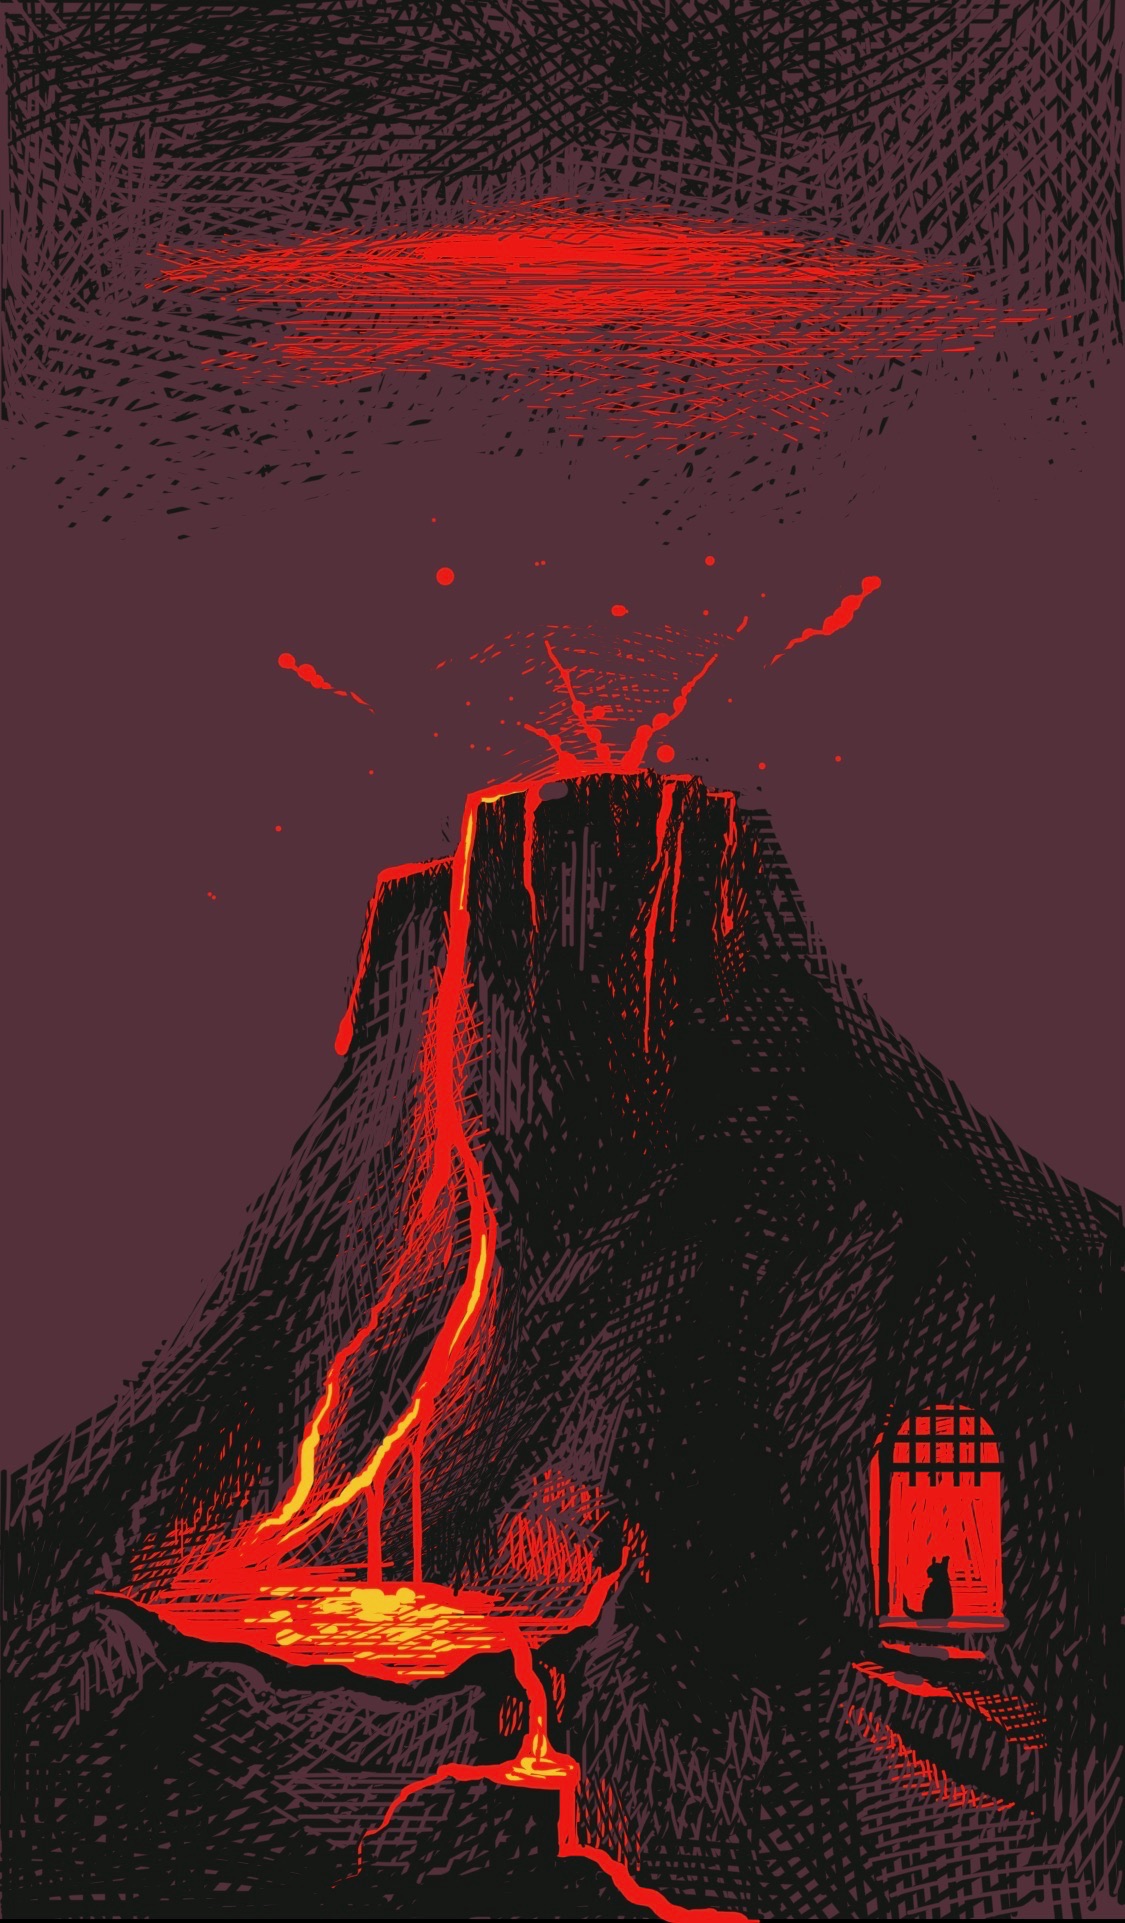 A volcano with a doorway in the rock, in which sits a cat